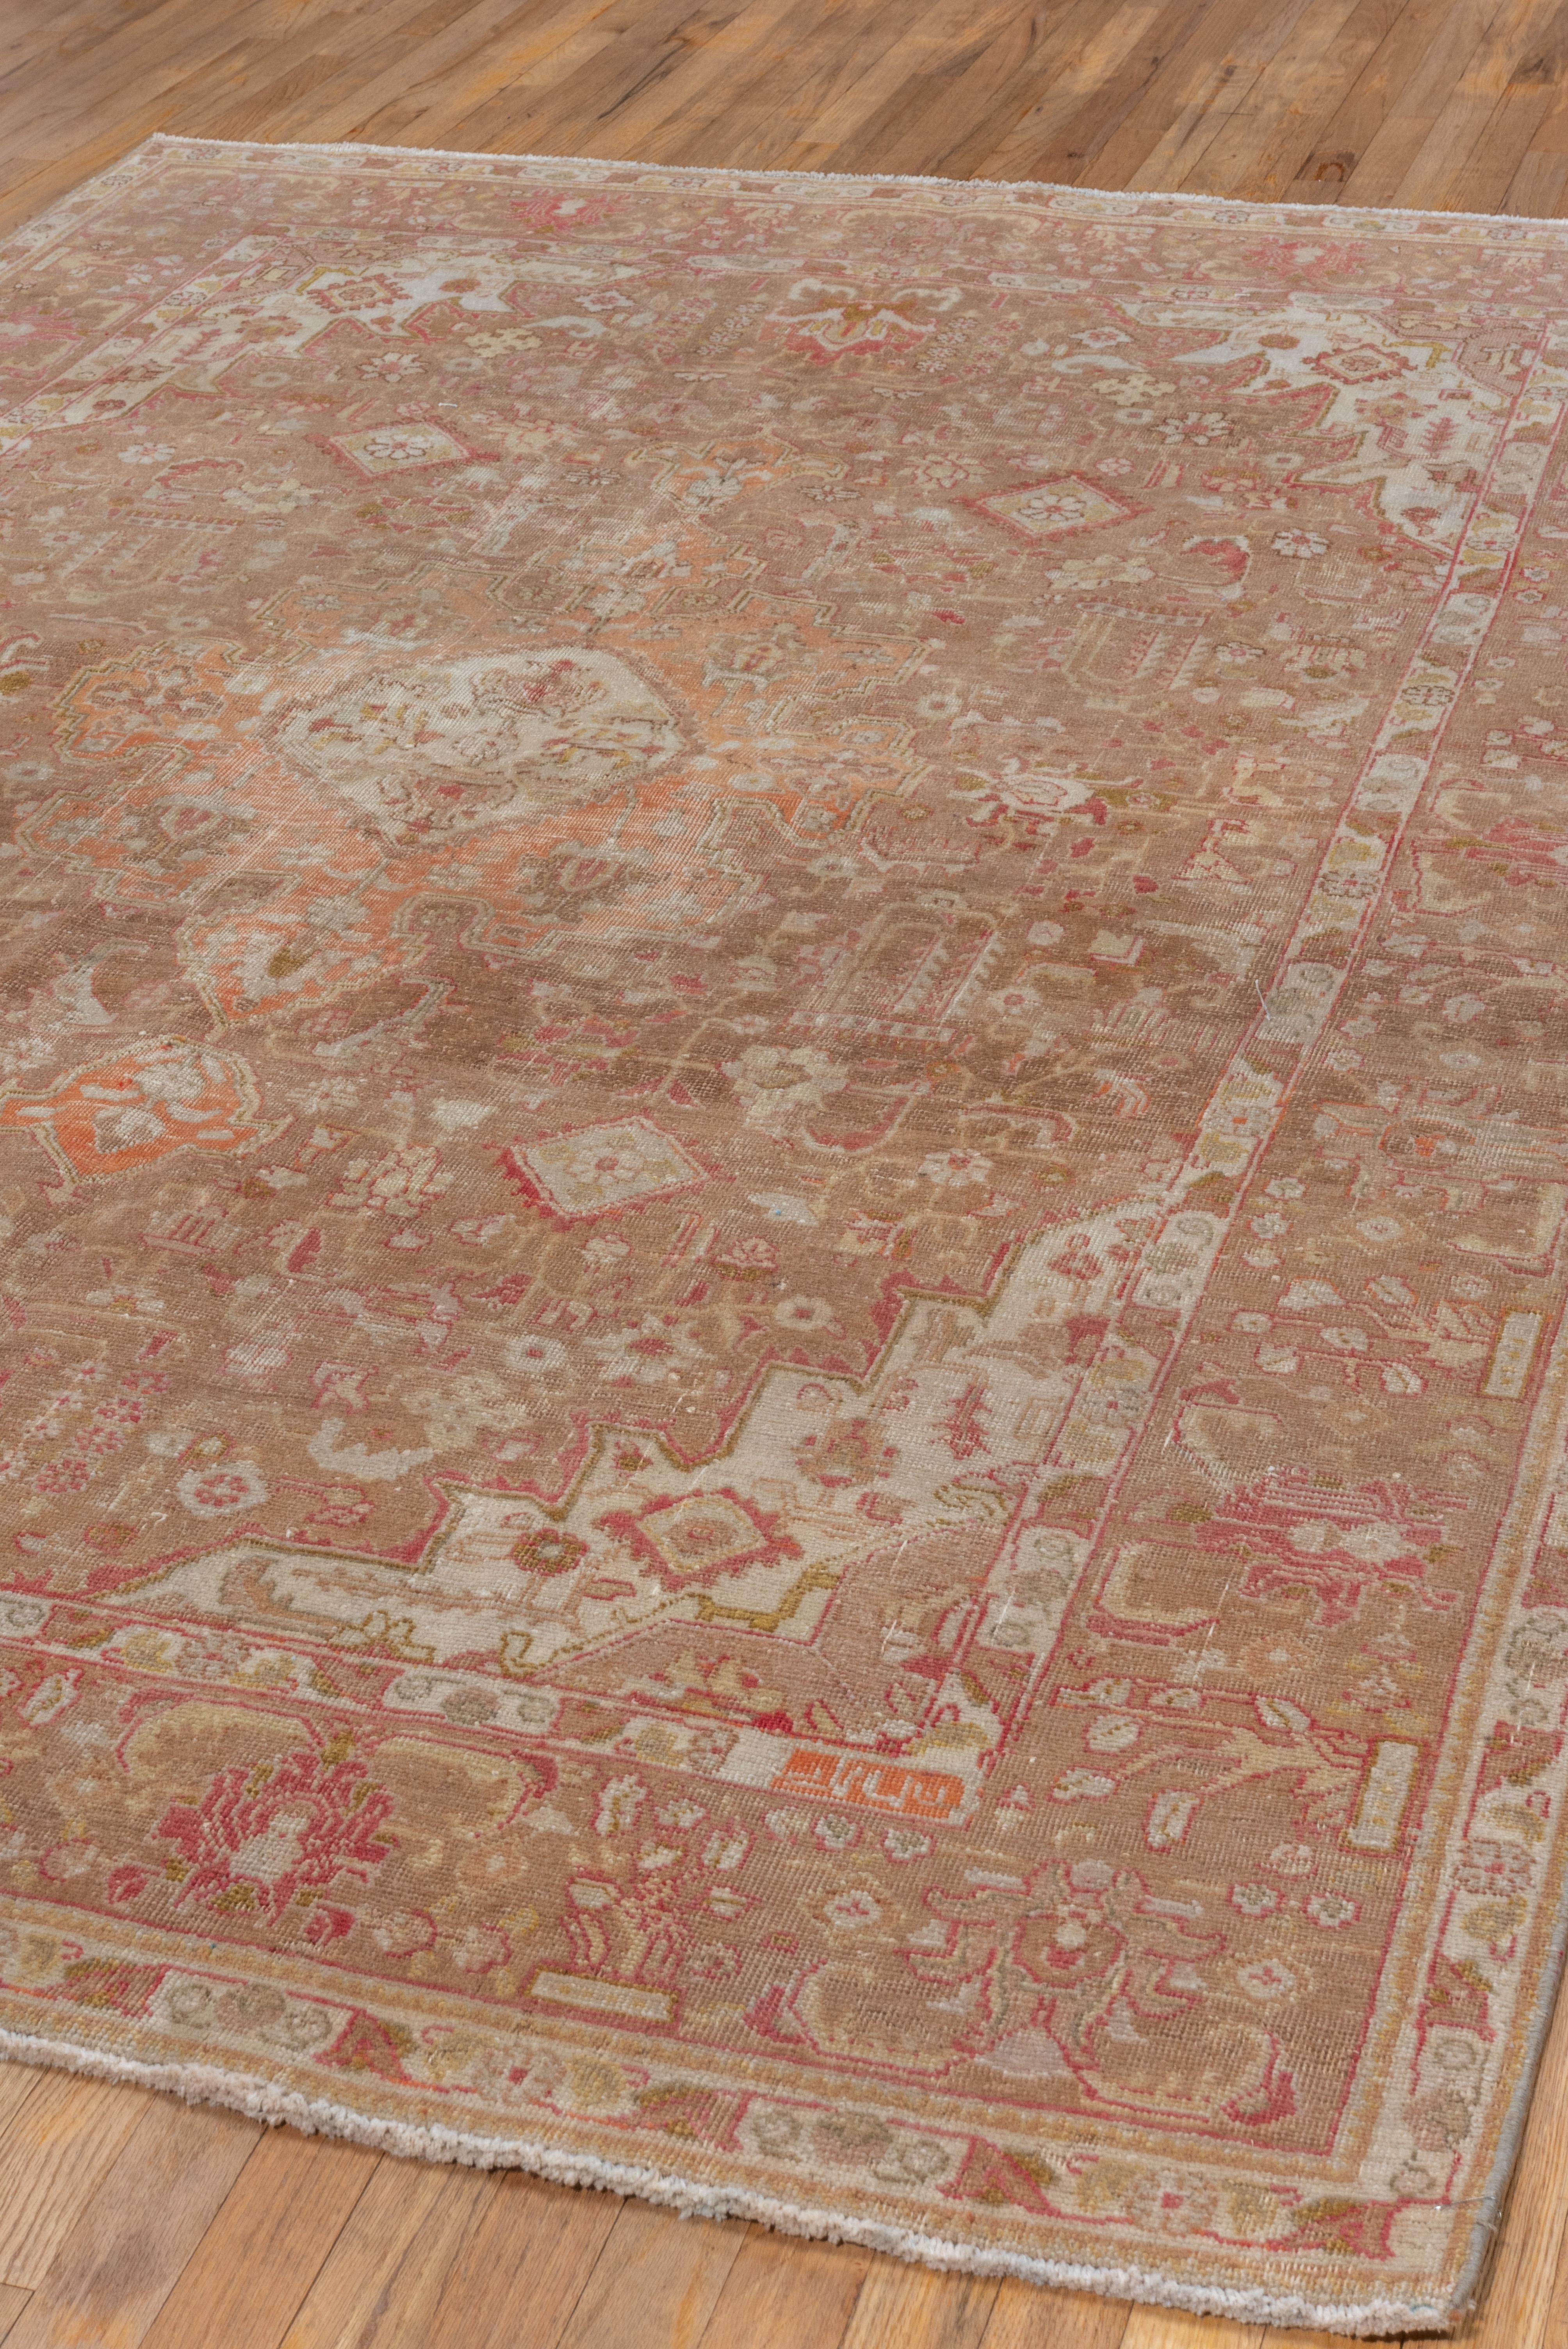 Hand-Knotted Mid 20th Century Persian Tabriz Area Rug Brown, Red and Citron Tones For Sale